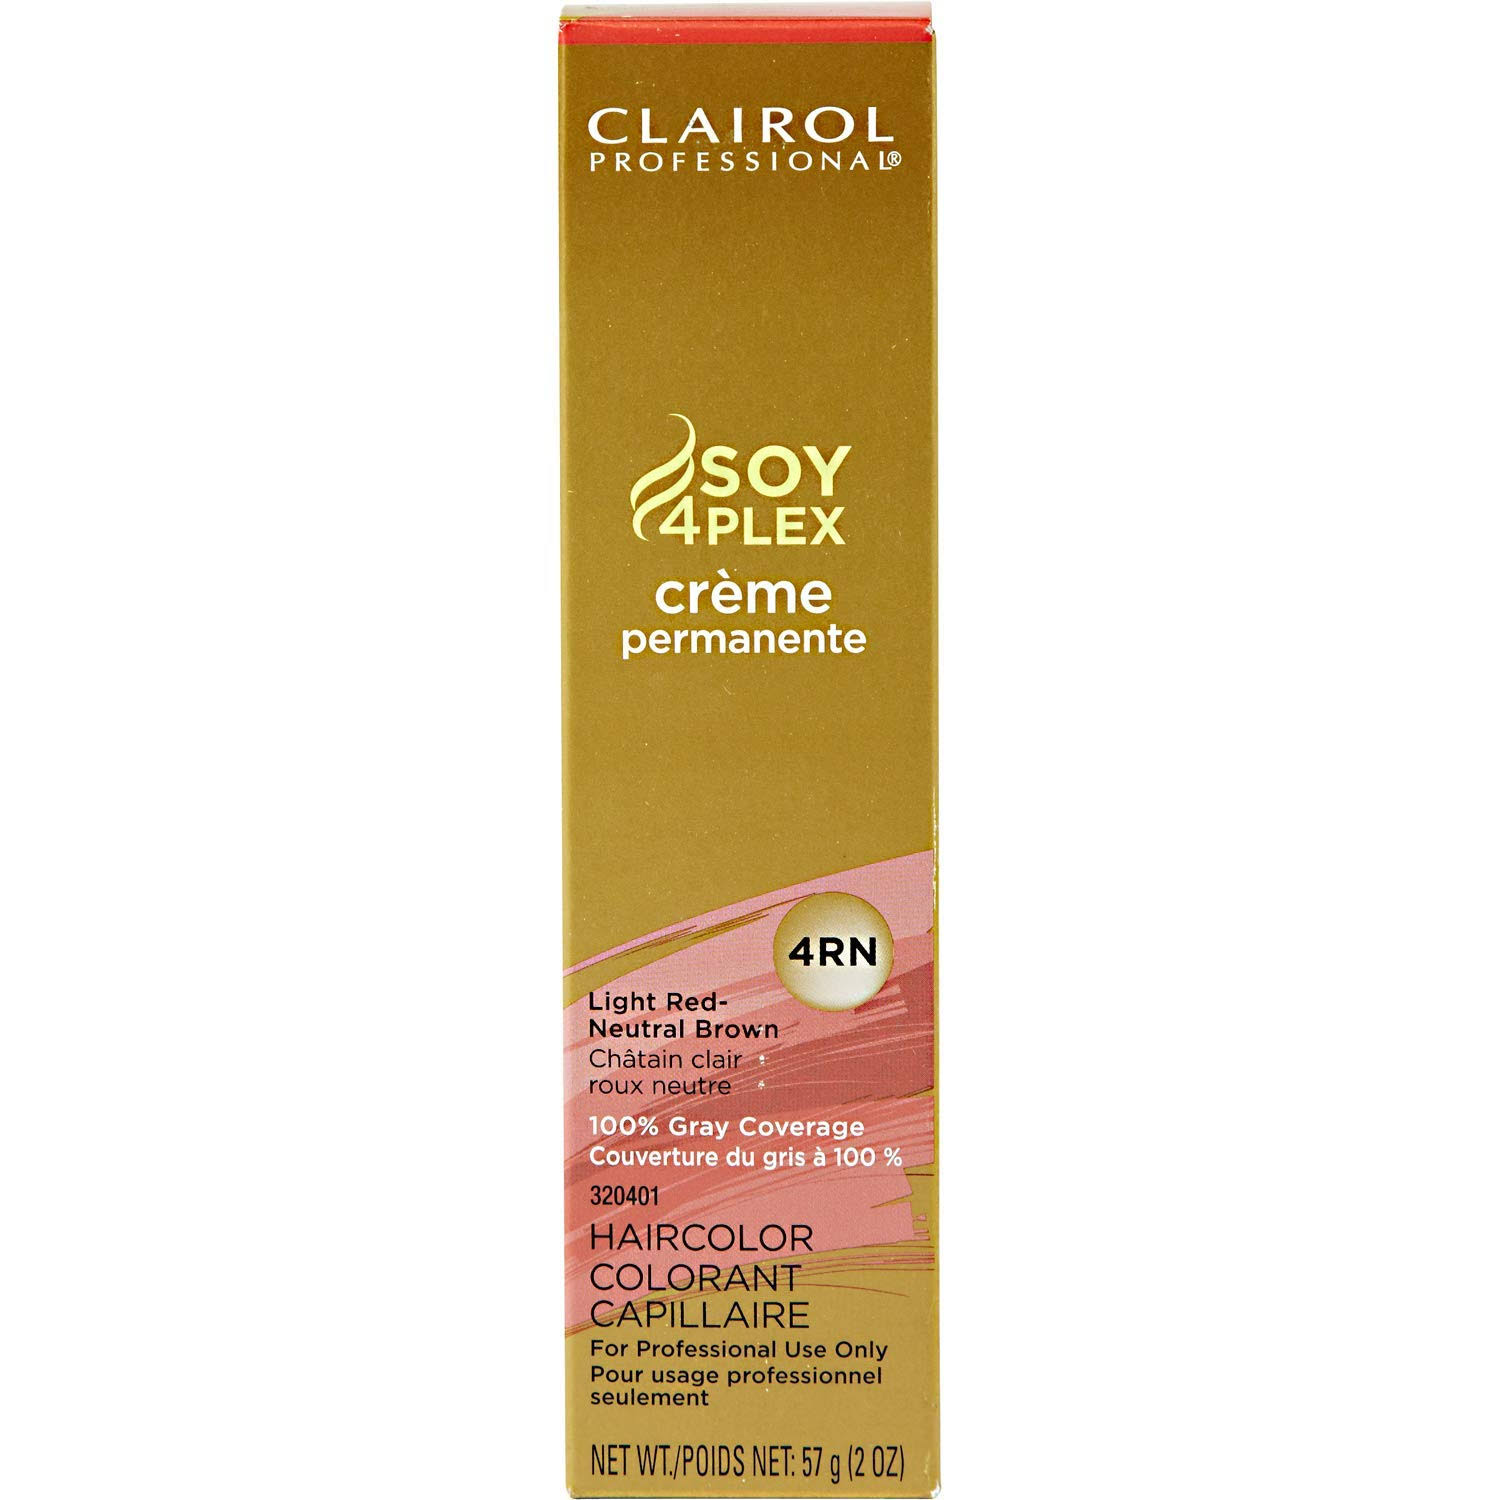 Clairol Professional Pro Creme, 4RN Light Red Neutral Brown, 2 Ounce